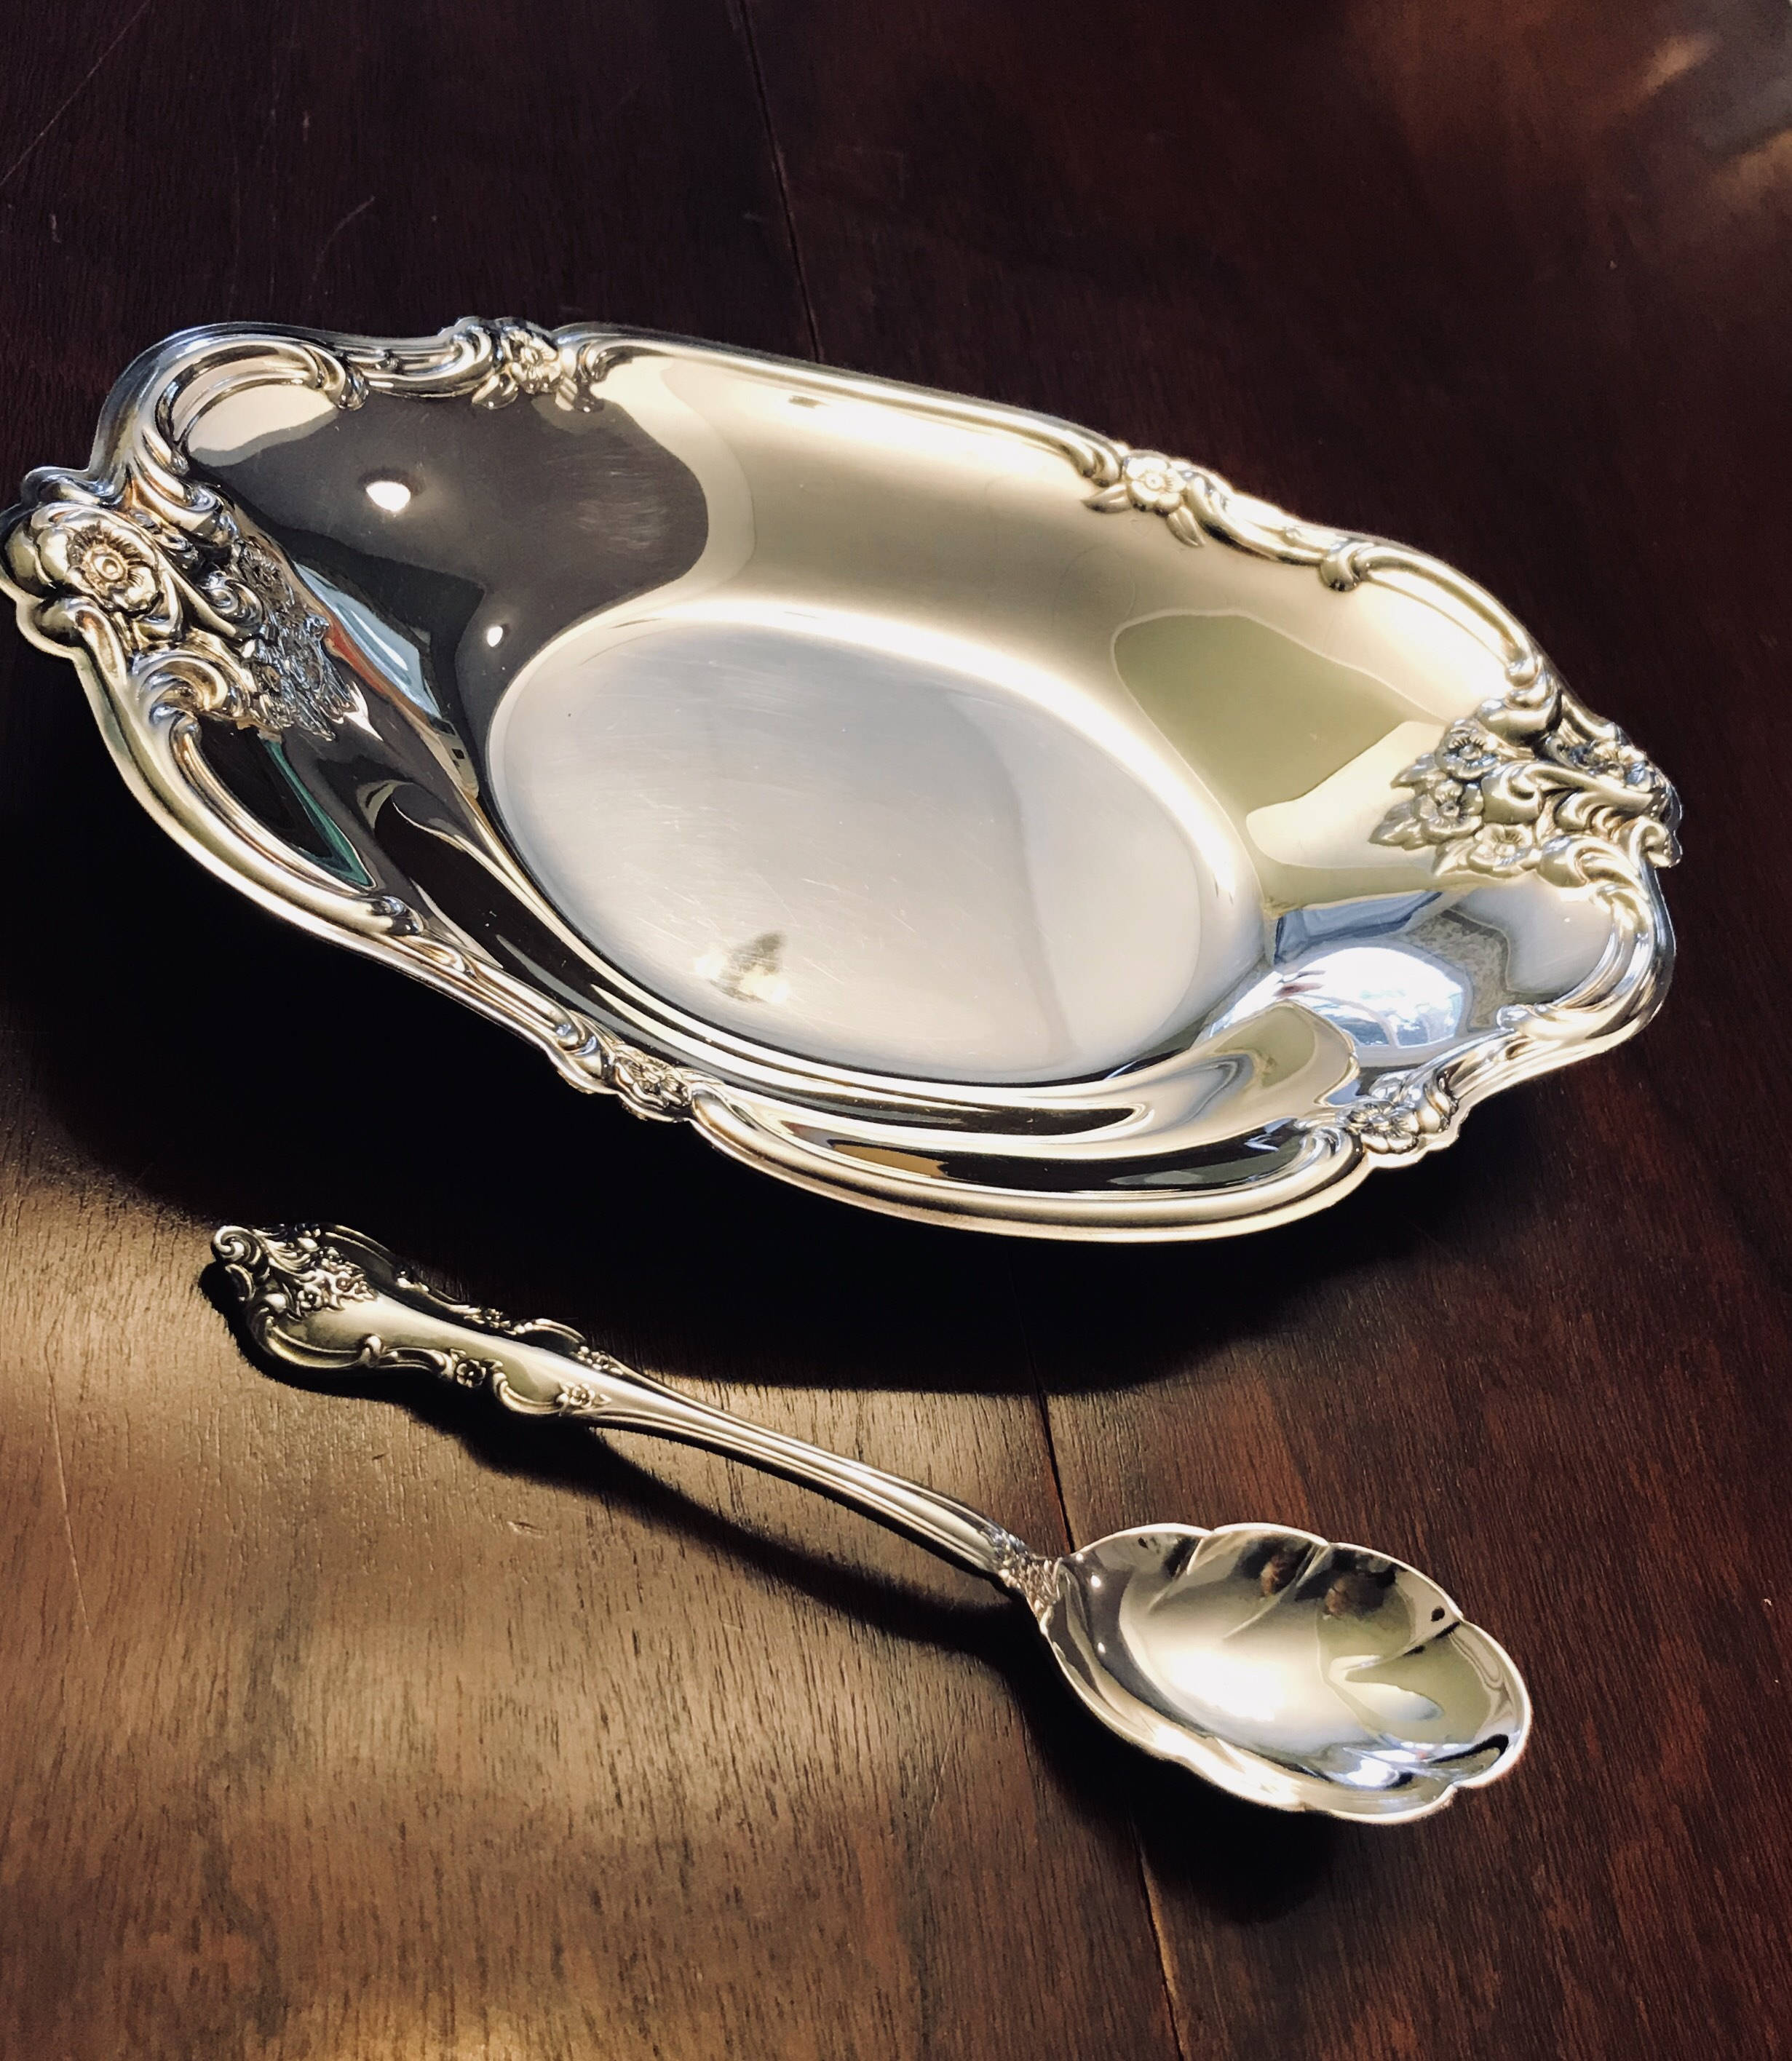 Vintage Silver plate Orleans Party set Silver serving bowl with spoon